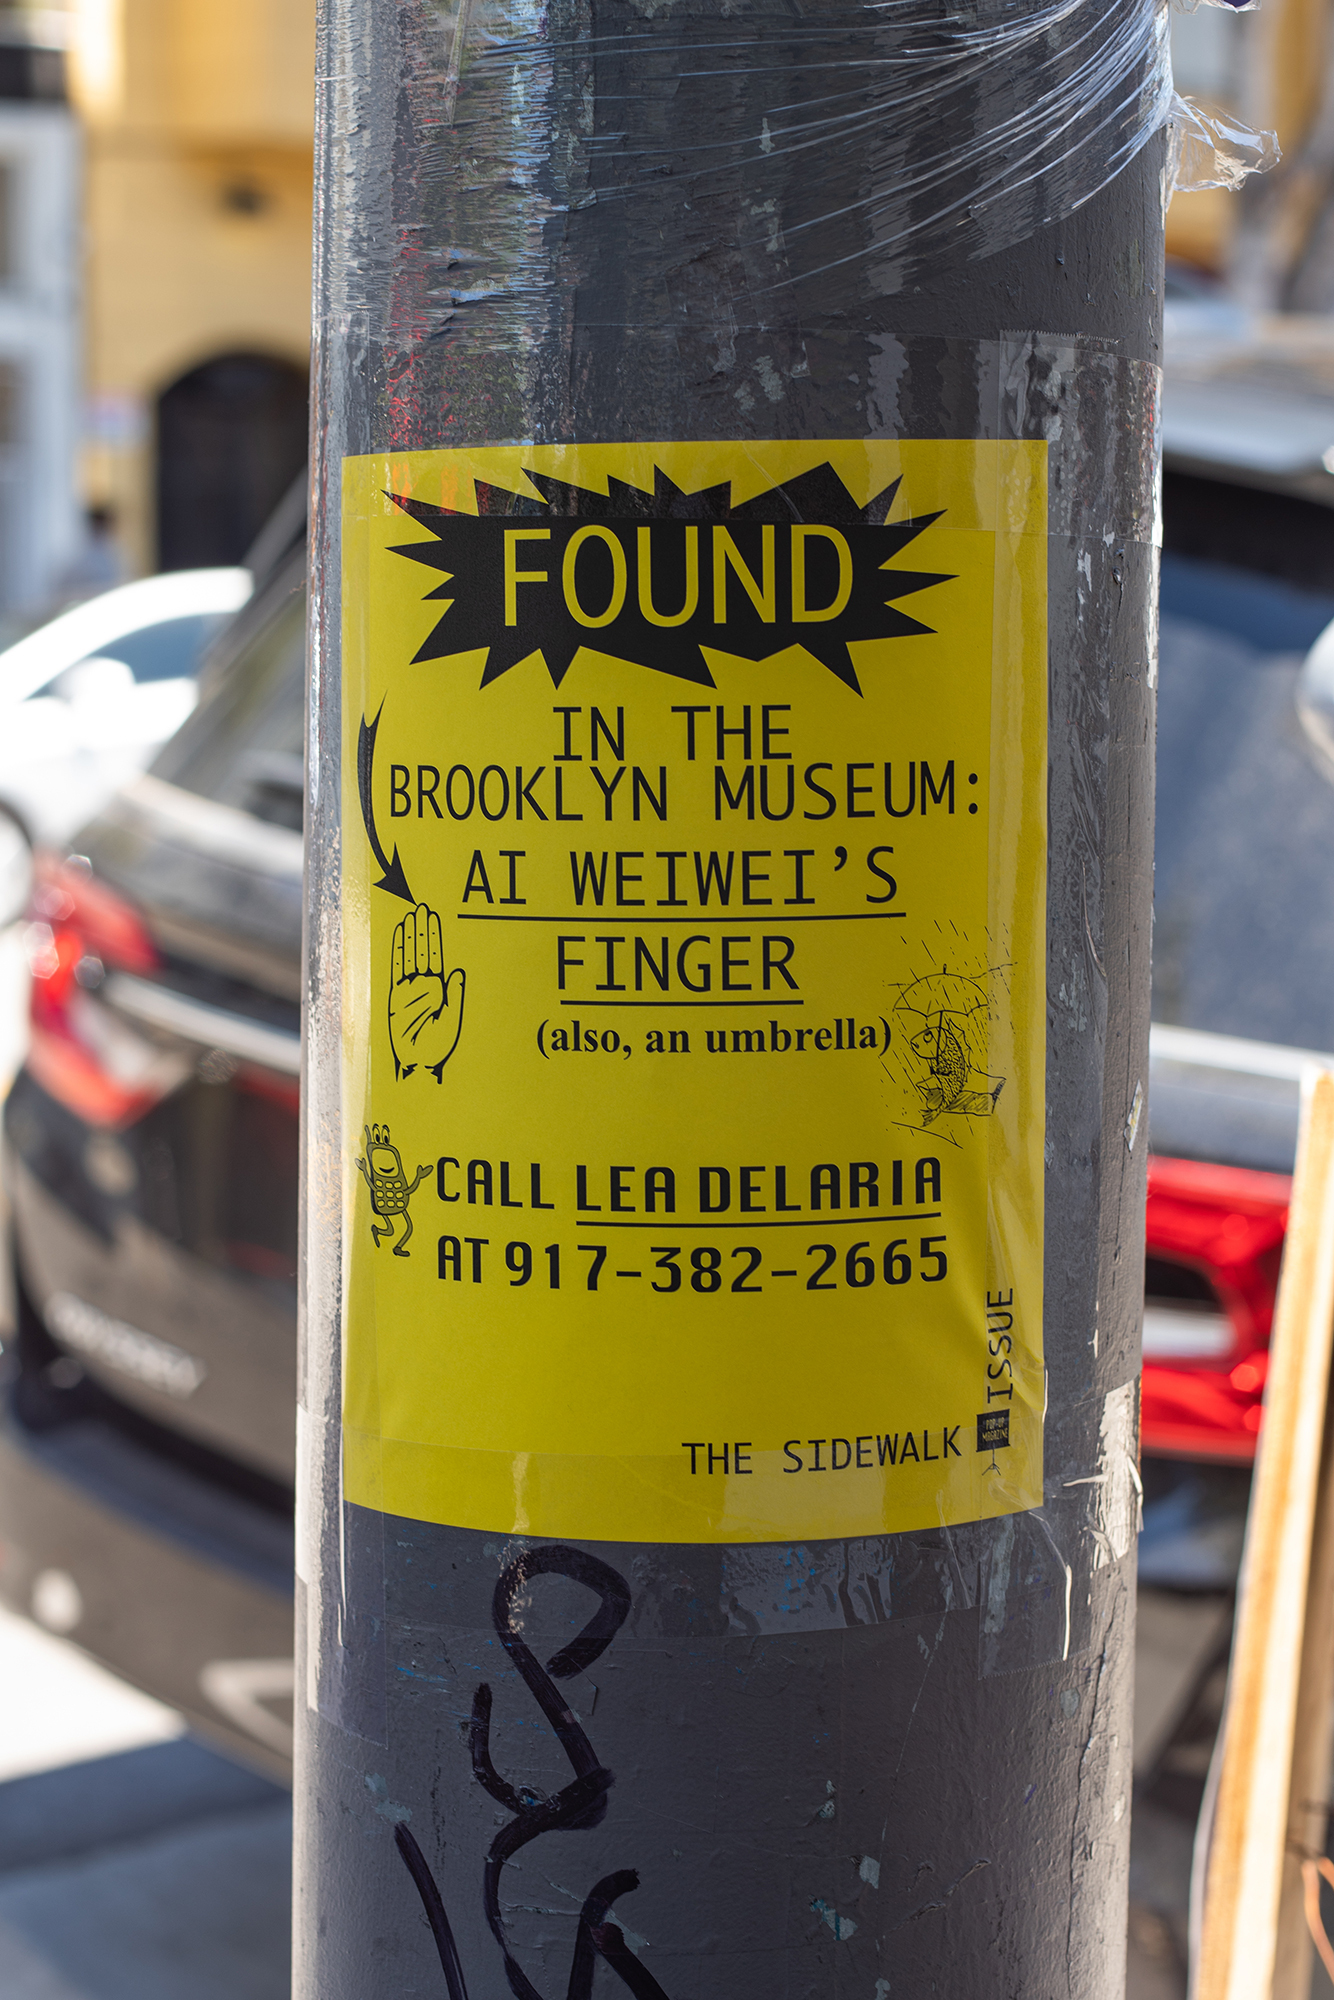 Image of a found item flyer